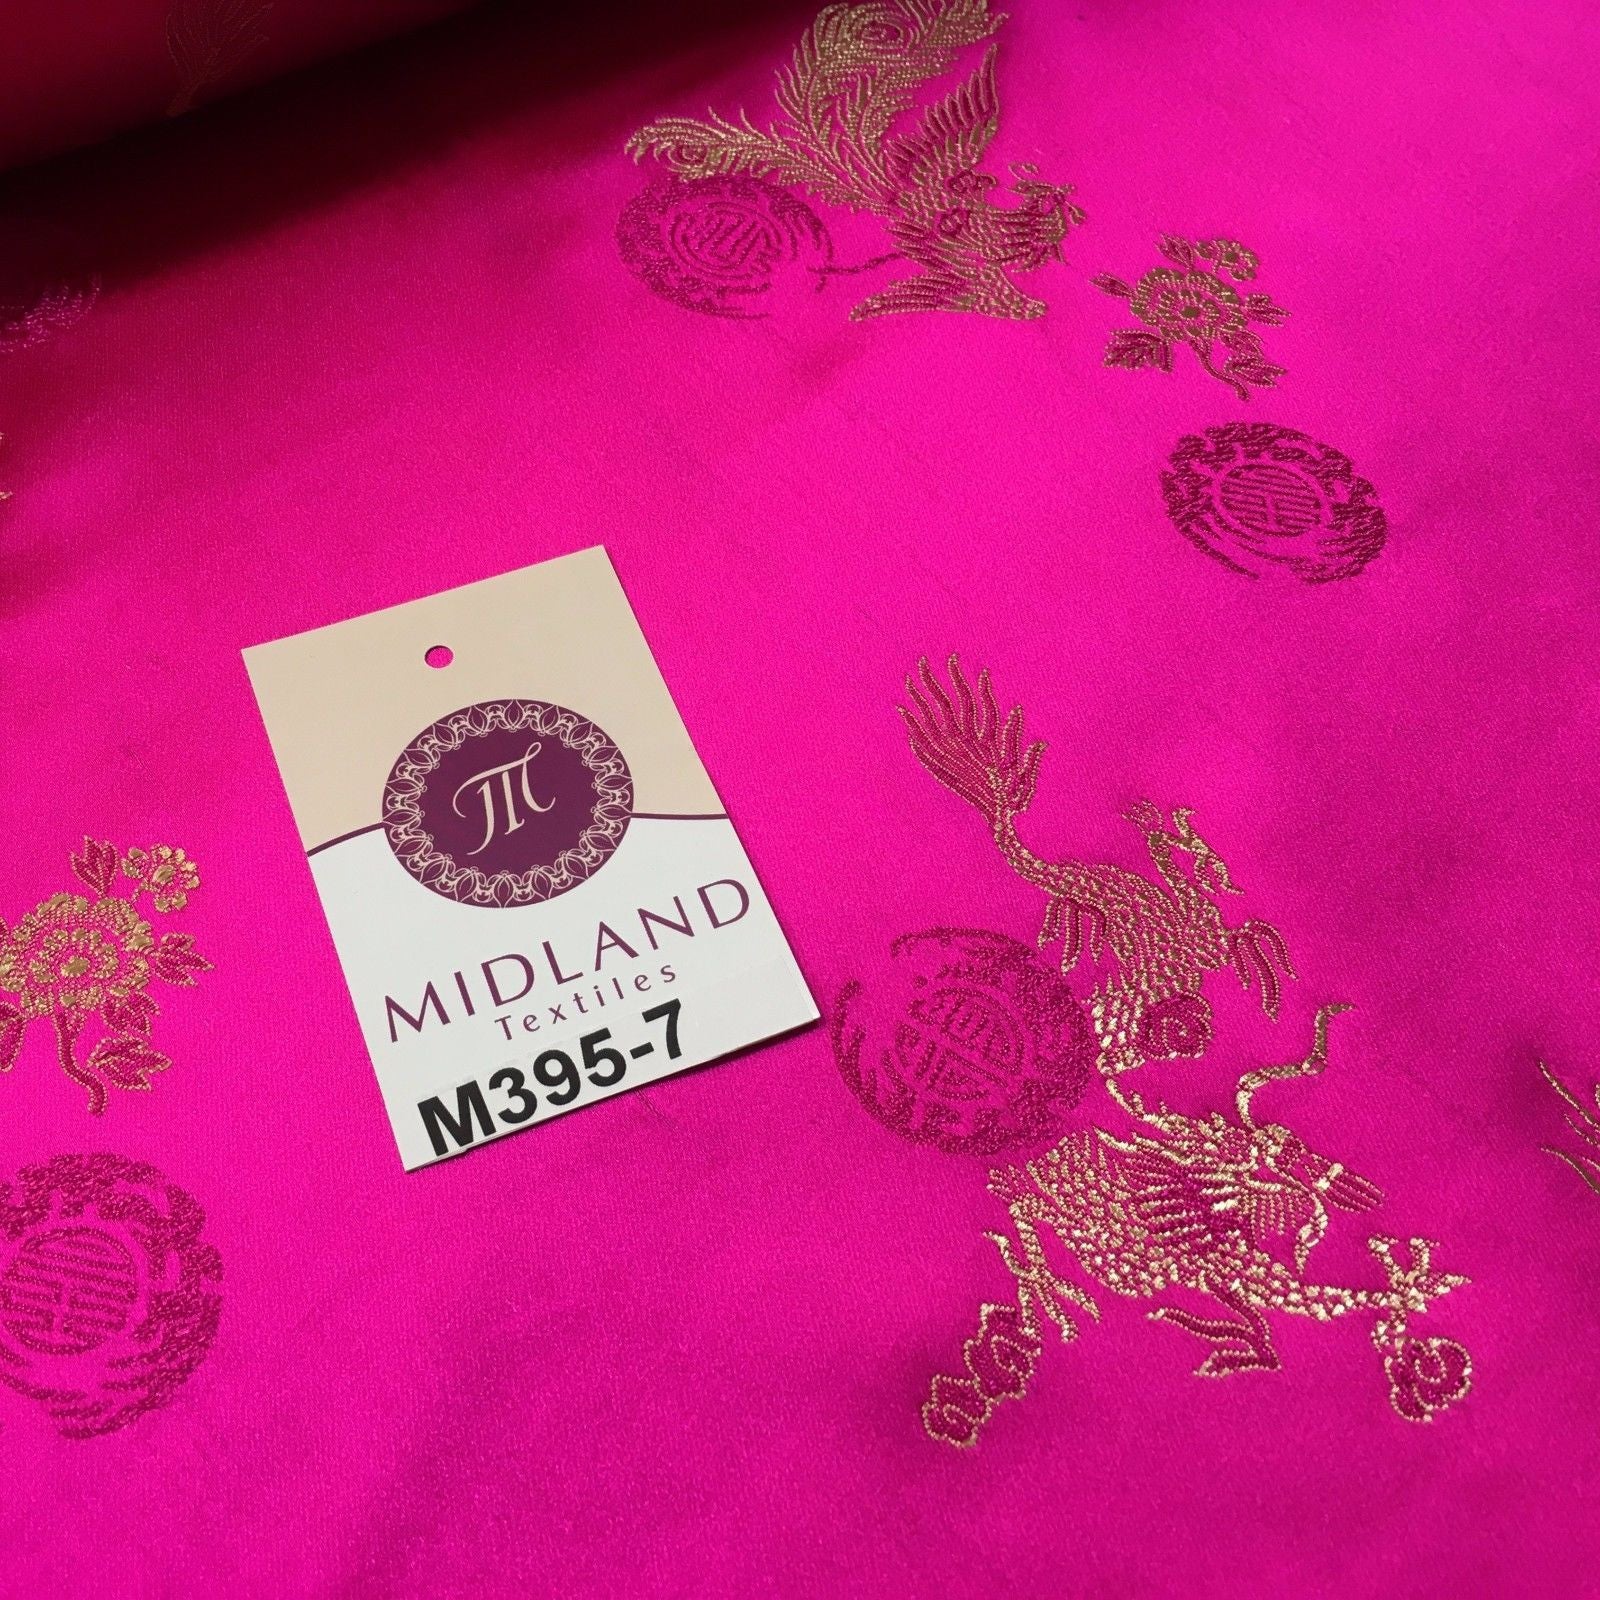 Traditional Cerise Pink Chinese Oriental Satin brocade 45" Wide M395-7 Mtex - Midland Textiles & Fabric